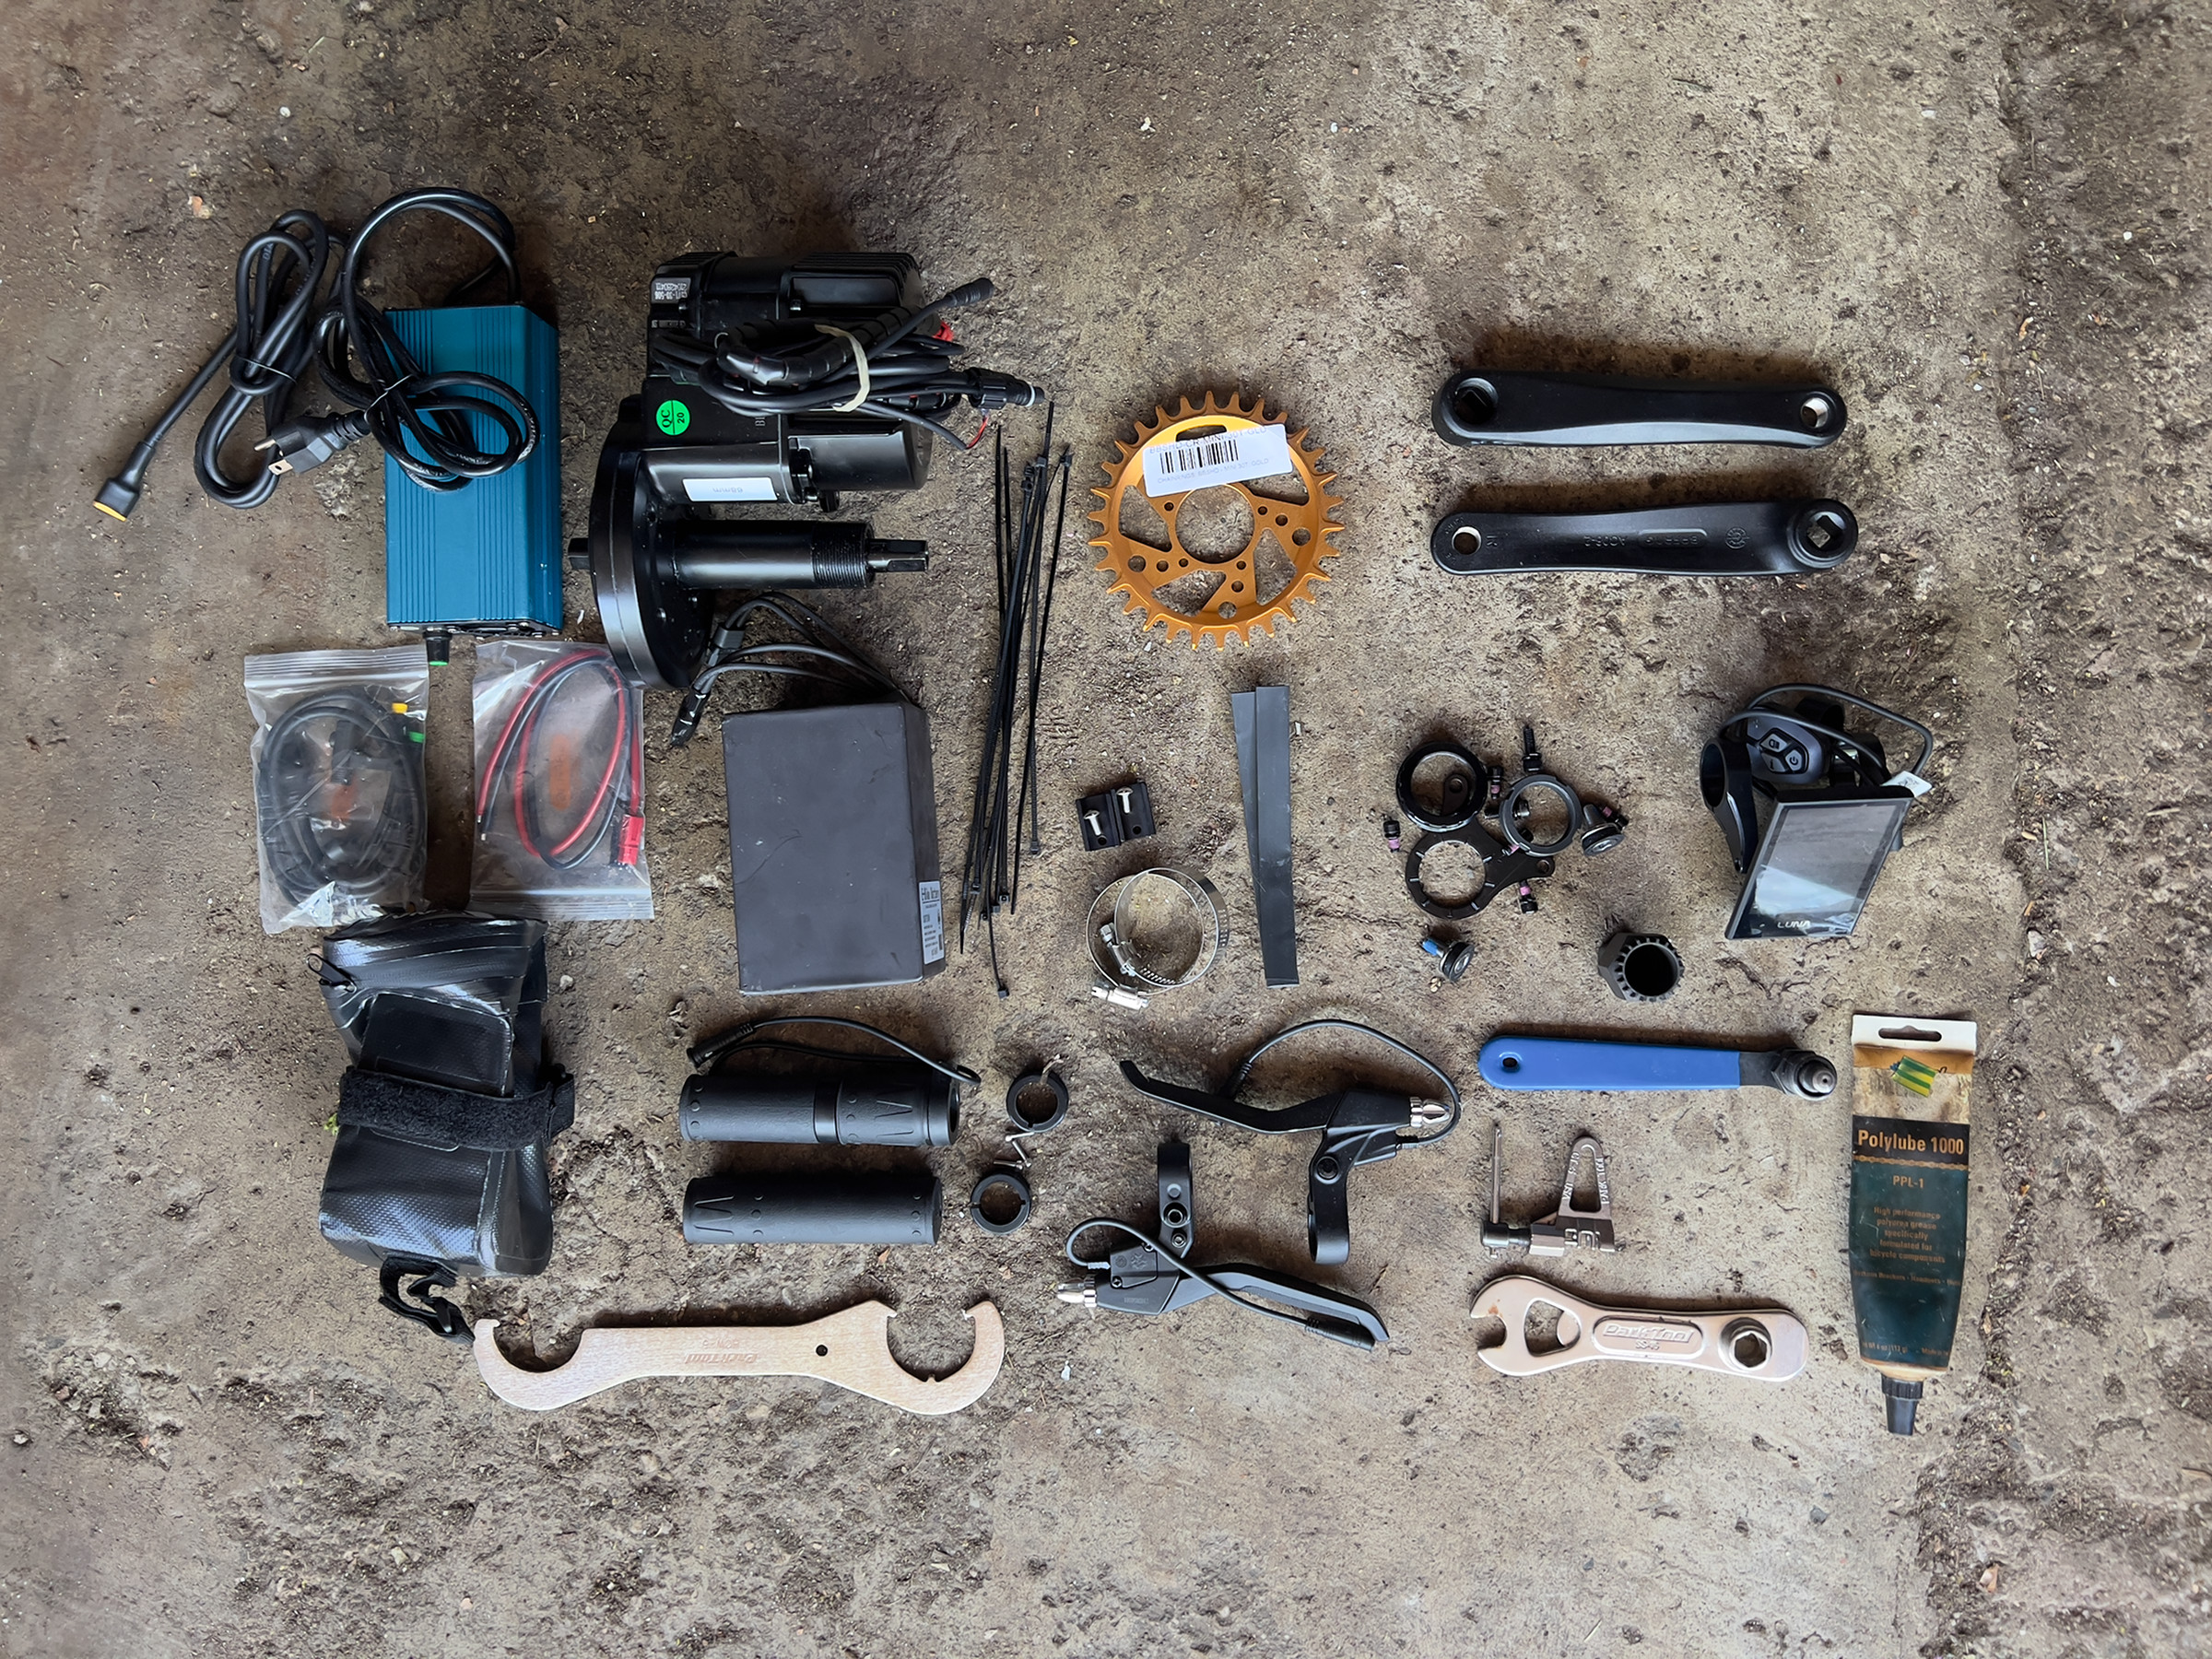 A picture of several of the tools and parts used in the build, laid out on the ground.